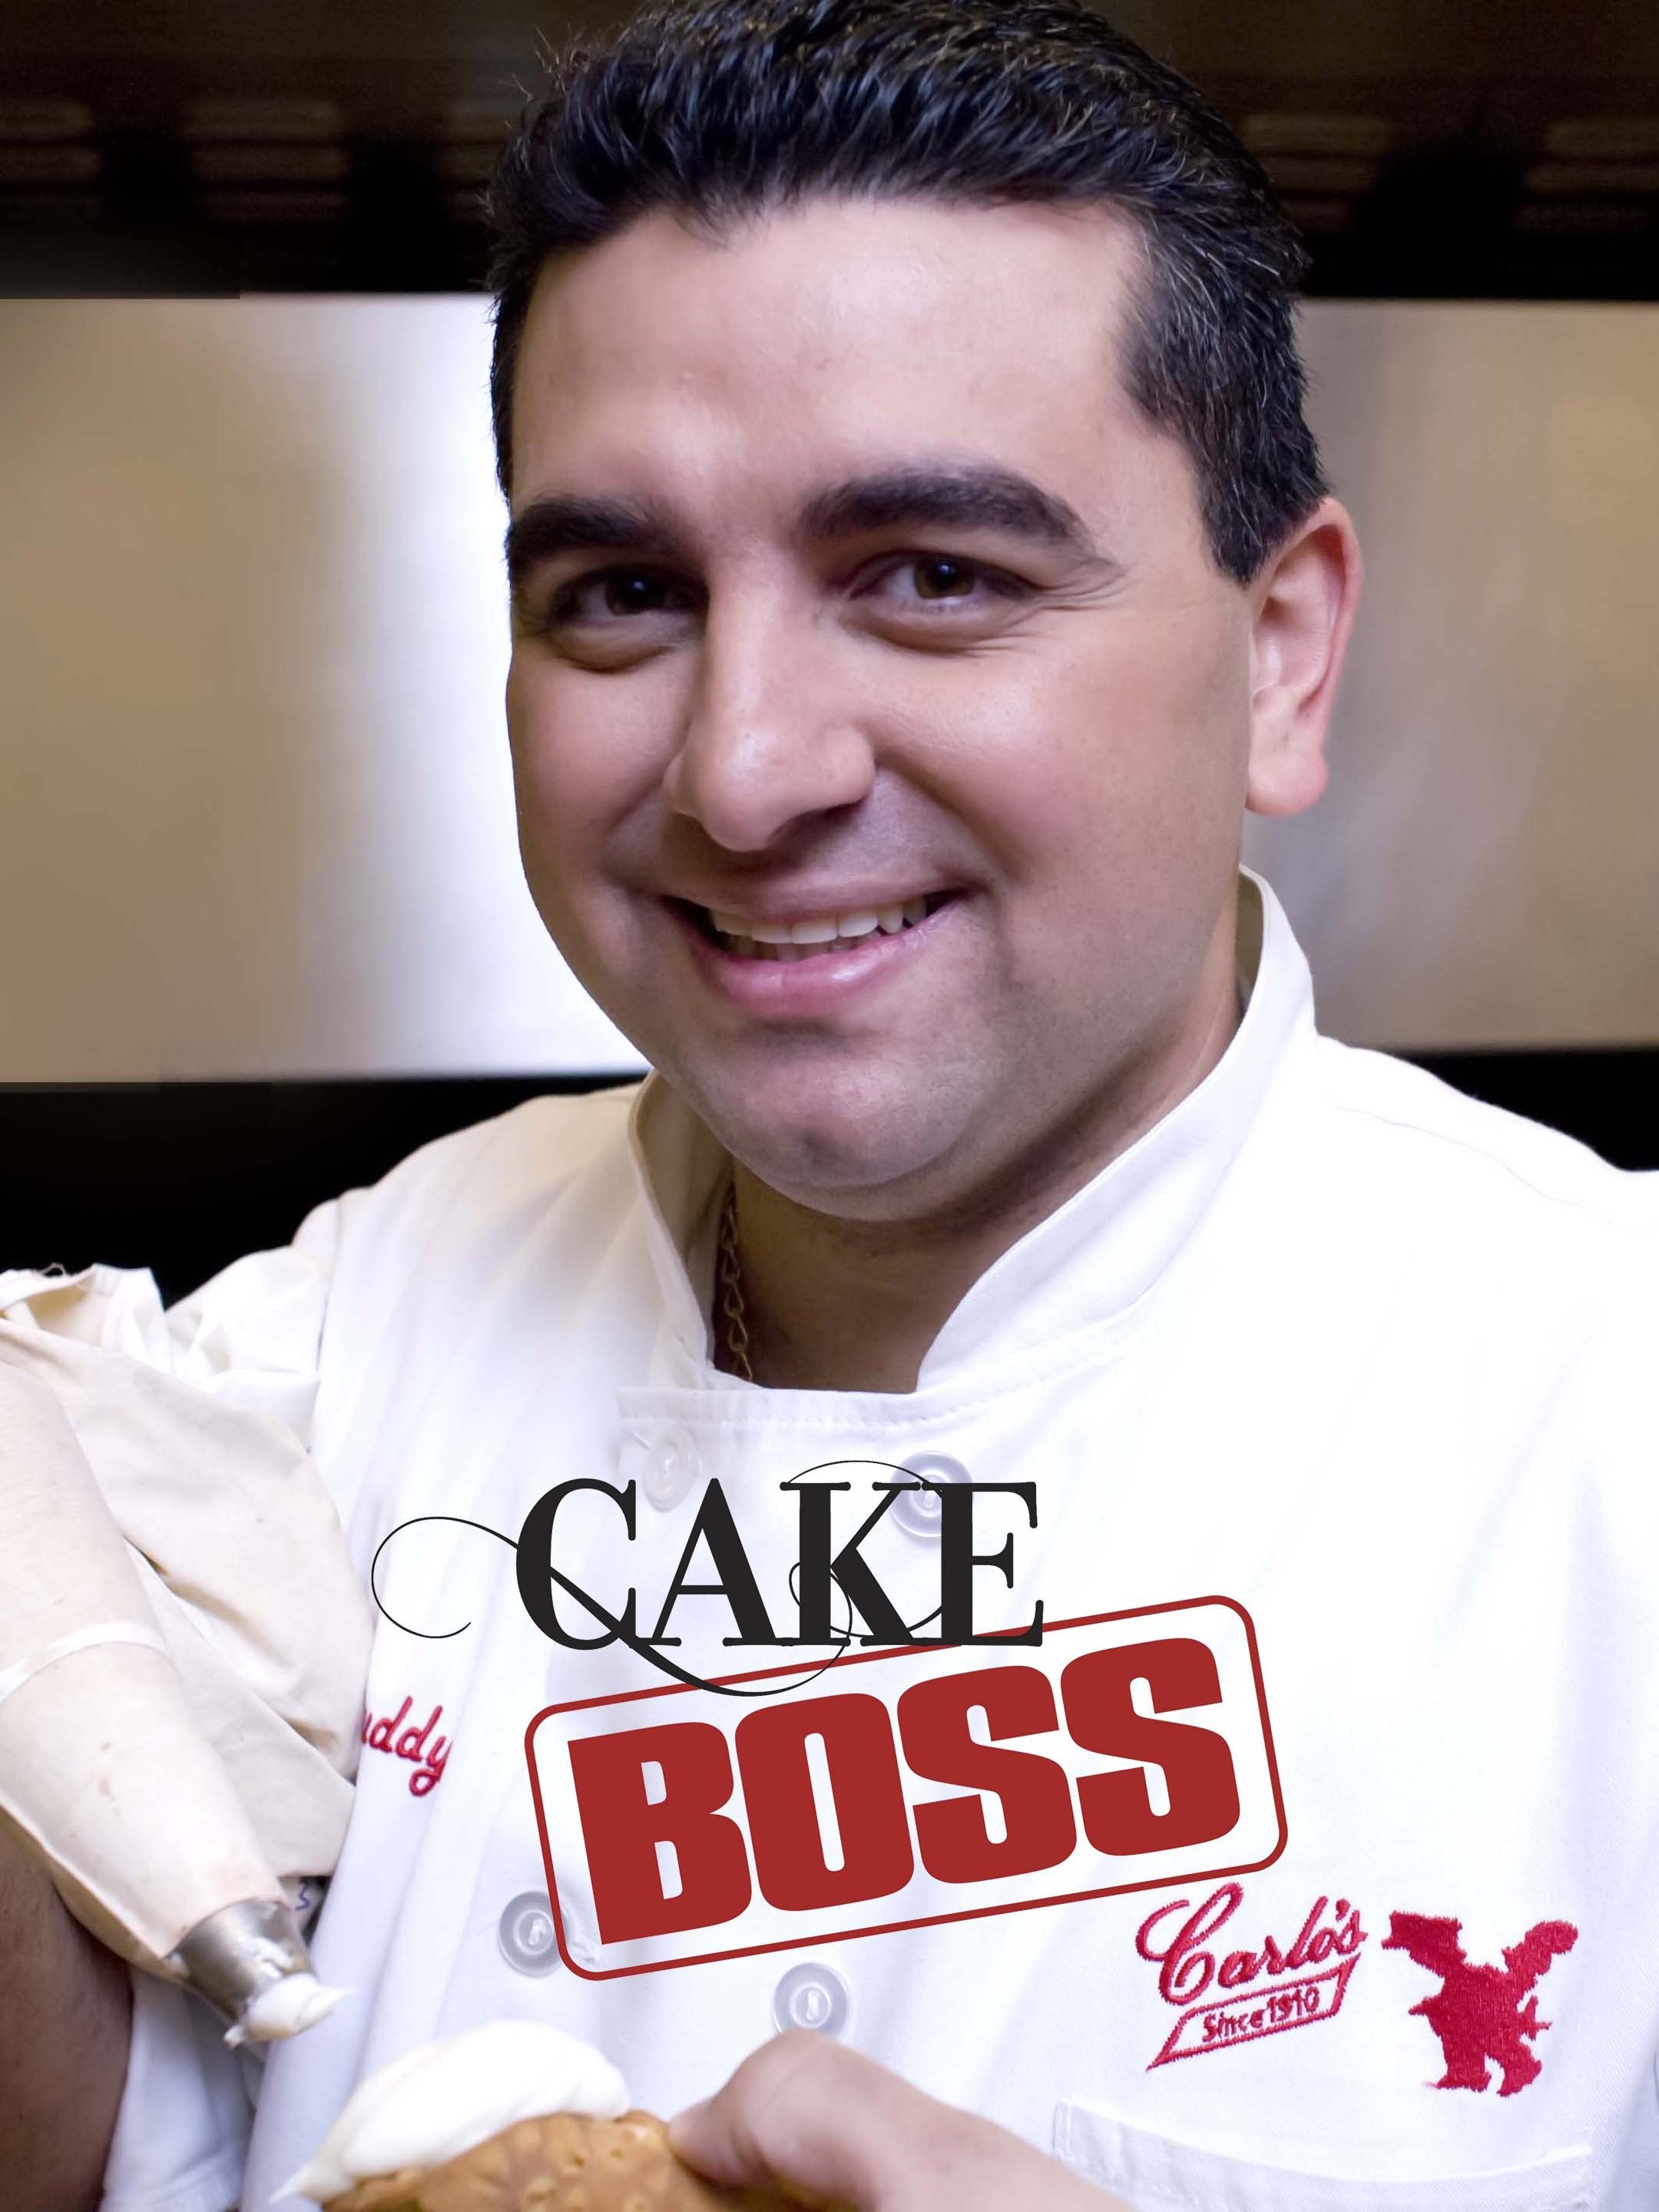 I Visited Cake Boss' Carlo's Bakery for the First Time and Here's What I  Think of Their Desserts